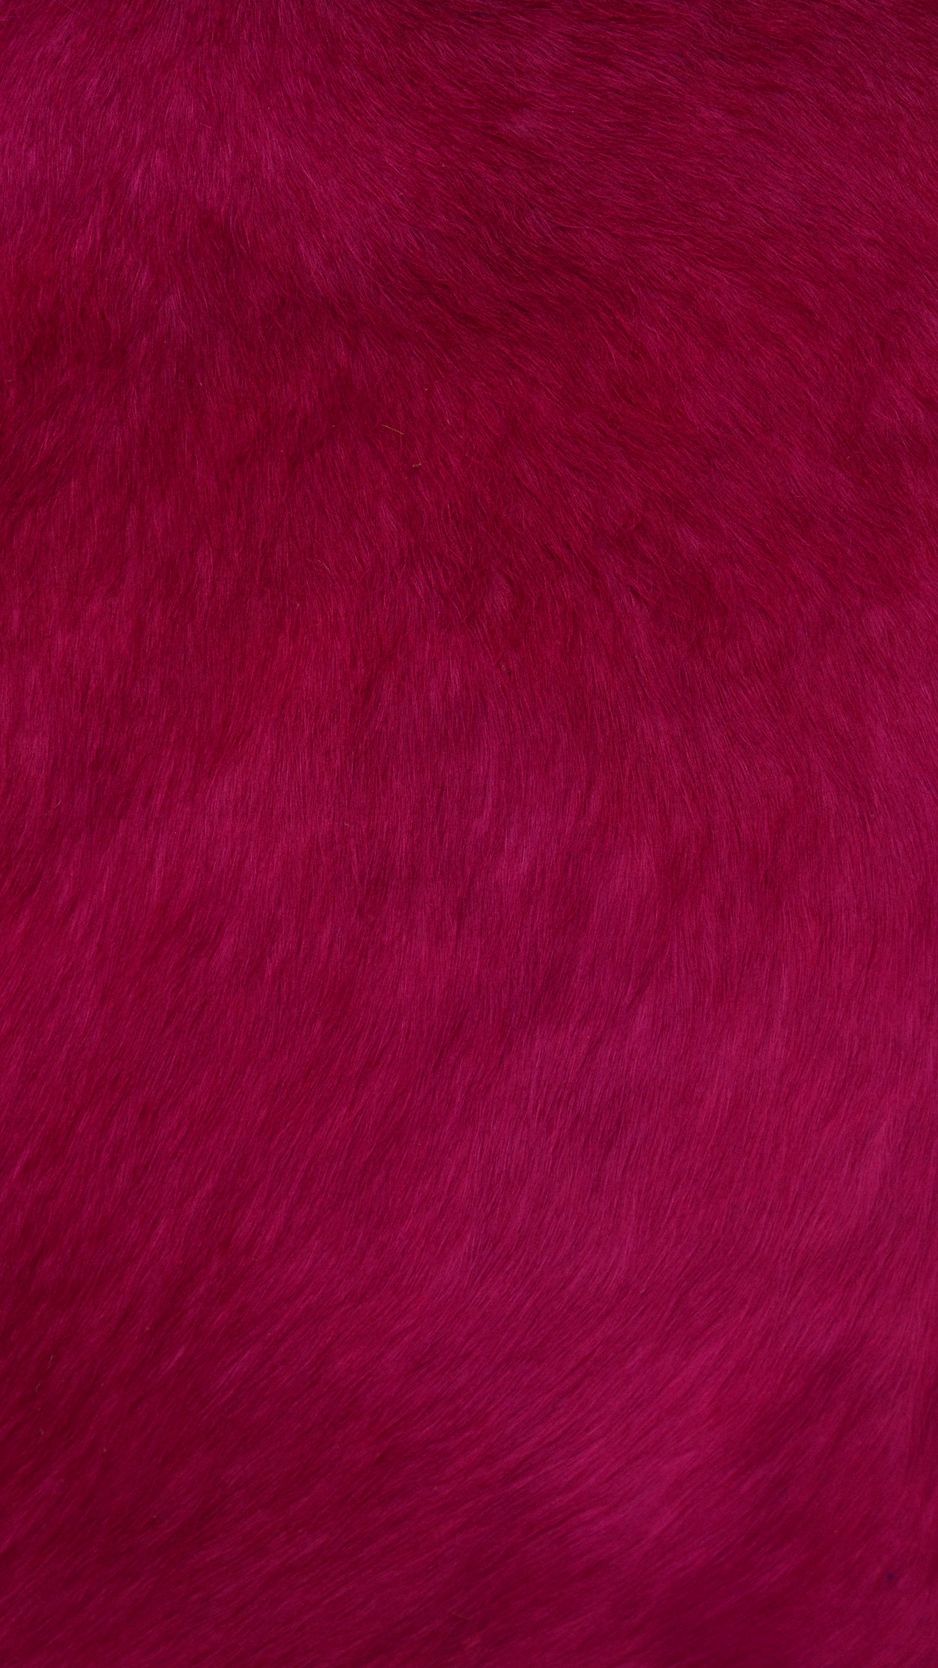 Download Wallpaper 938x1668 Fur, Texture, Red, Surface Iphone 8 7